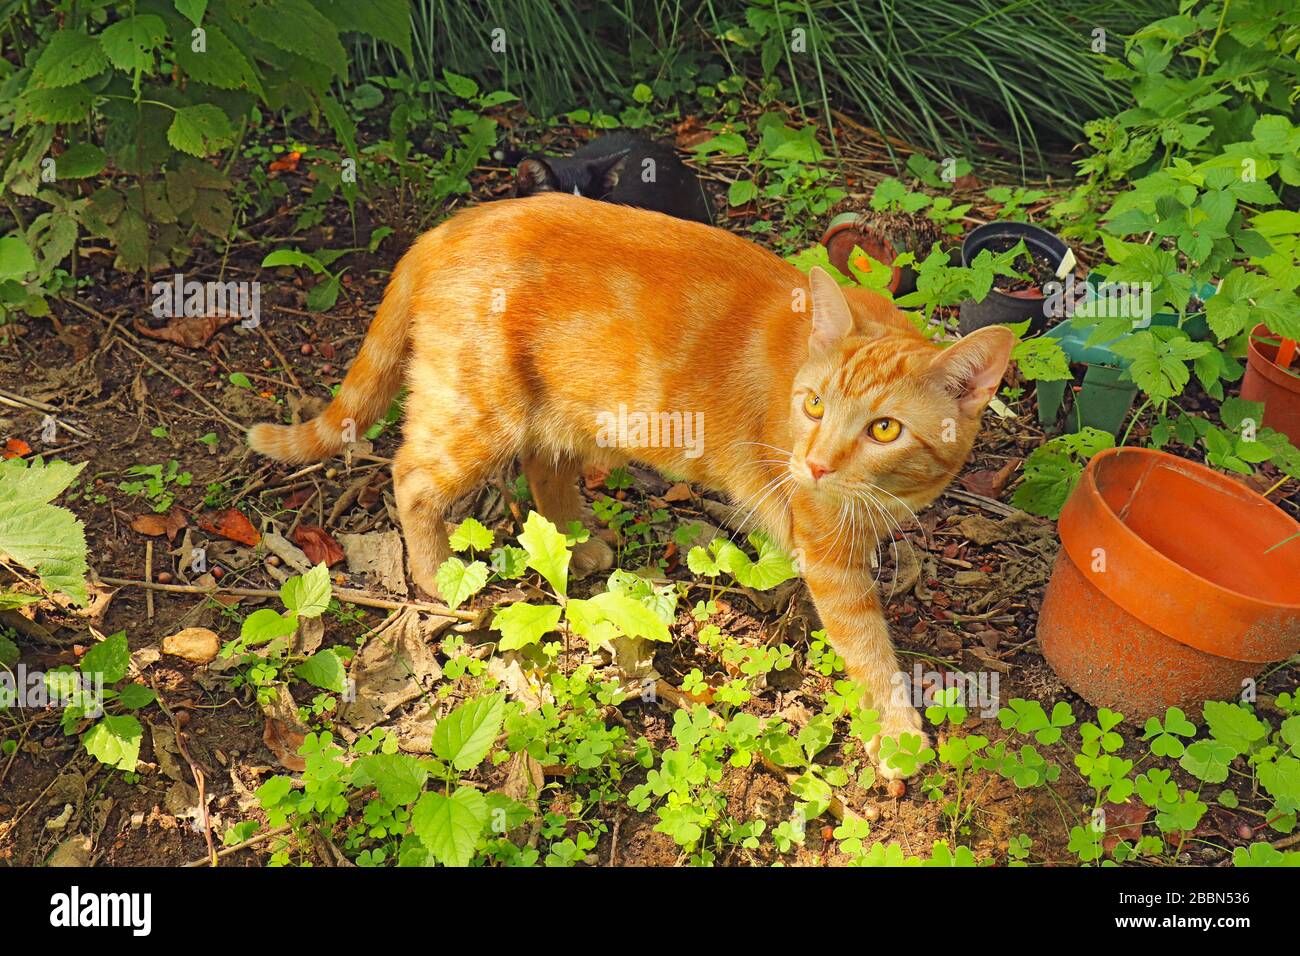 A copper-eyed, orange domestic shorthair classic red tabby cat (Felis catus) outside surrounded by vegetation Stock Photo